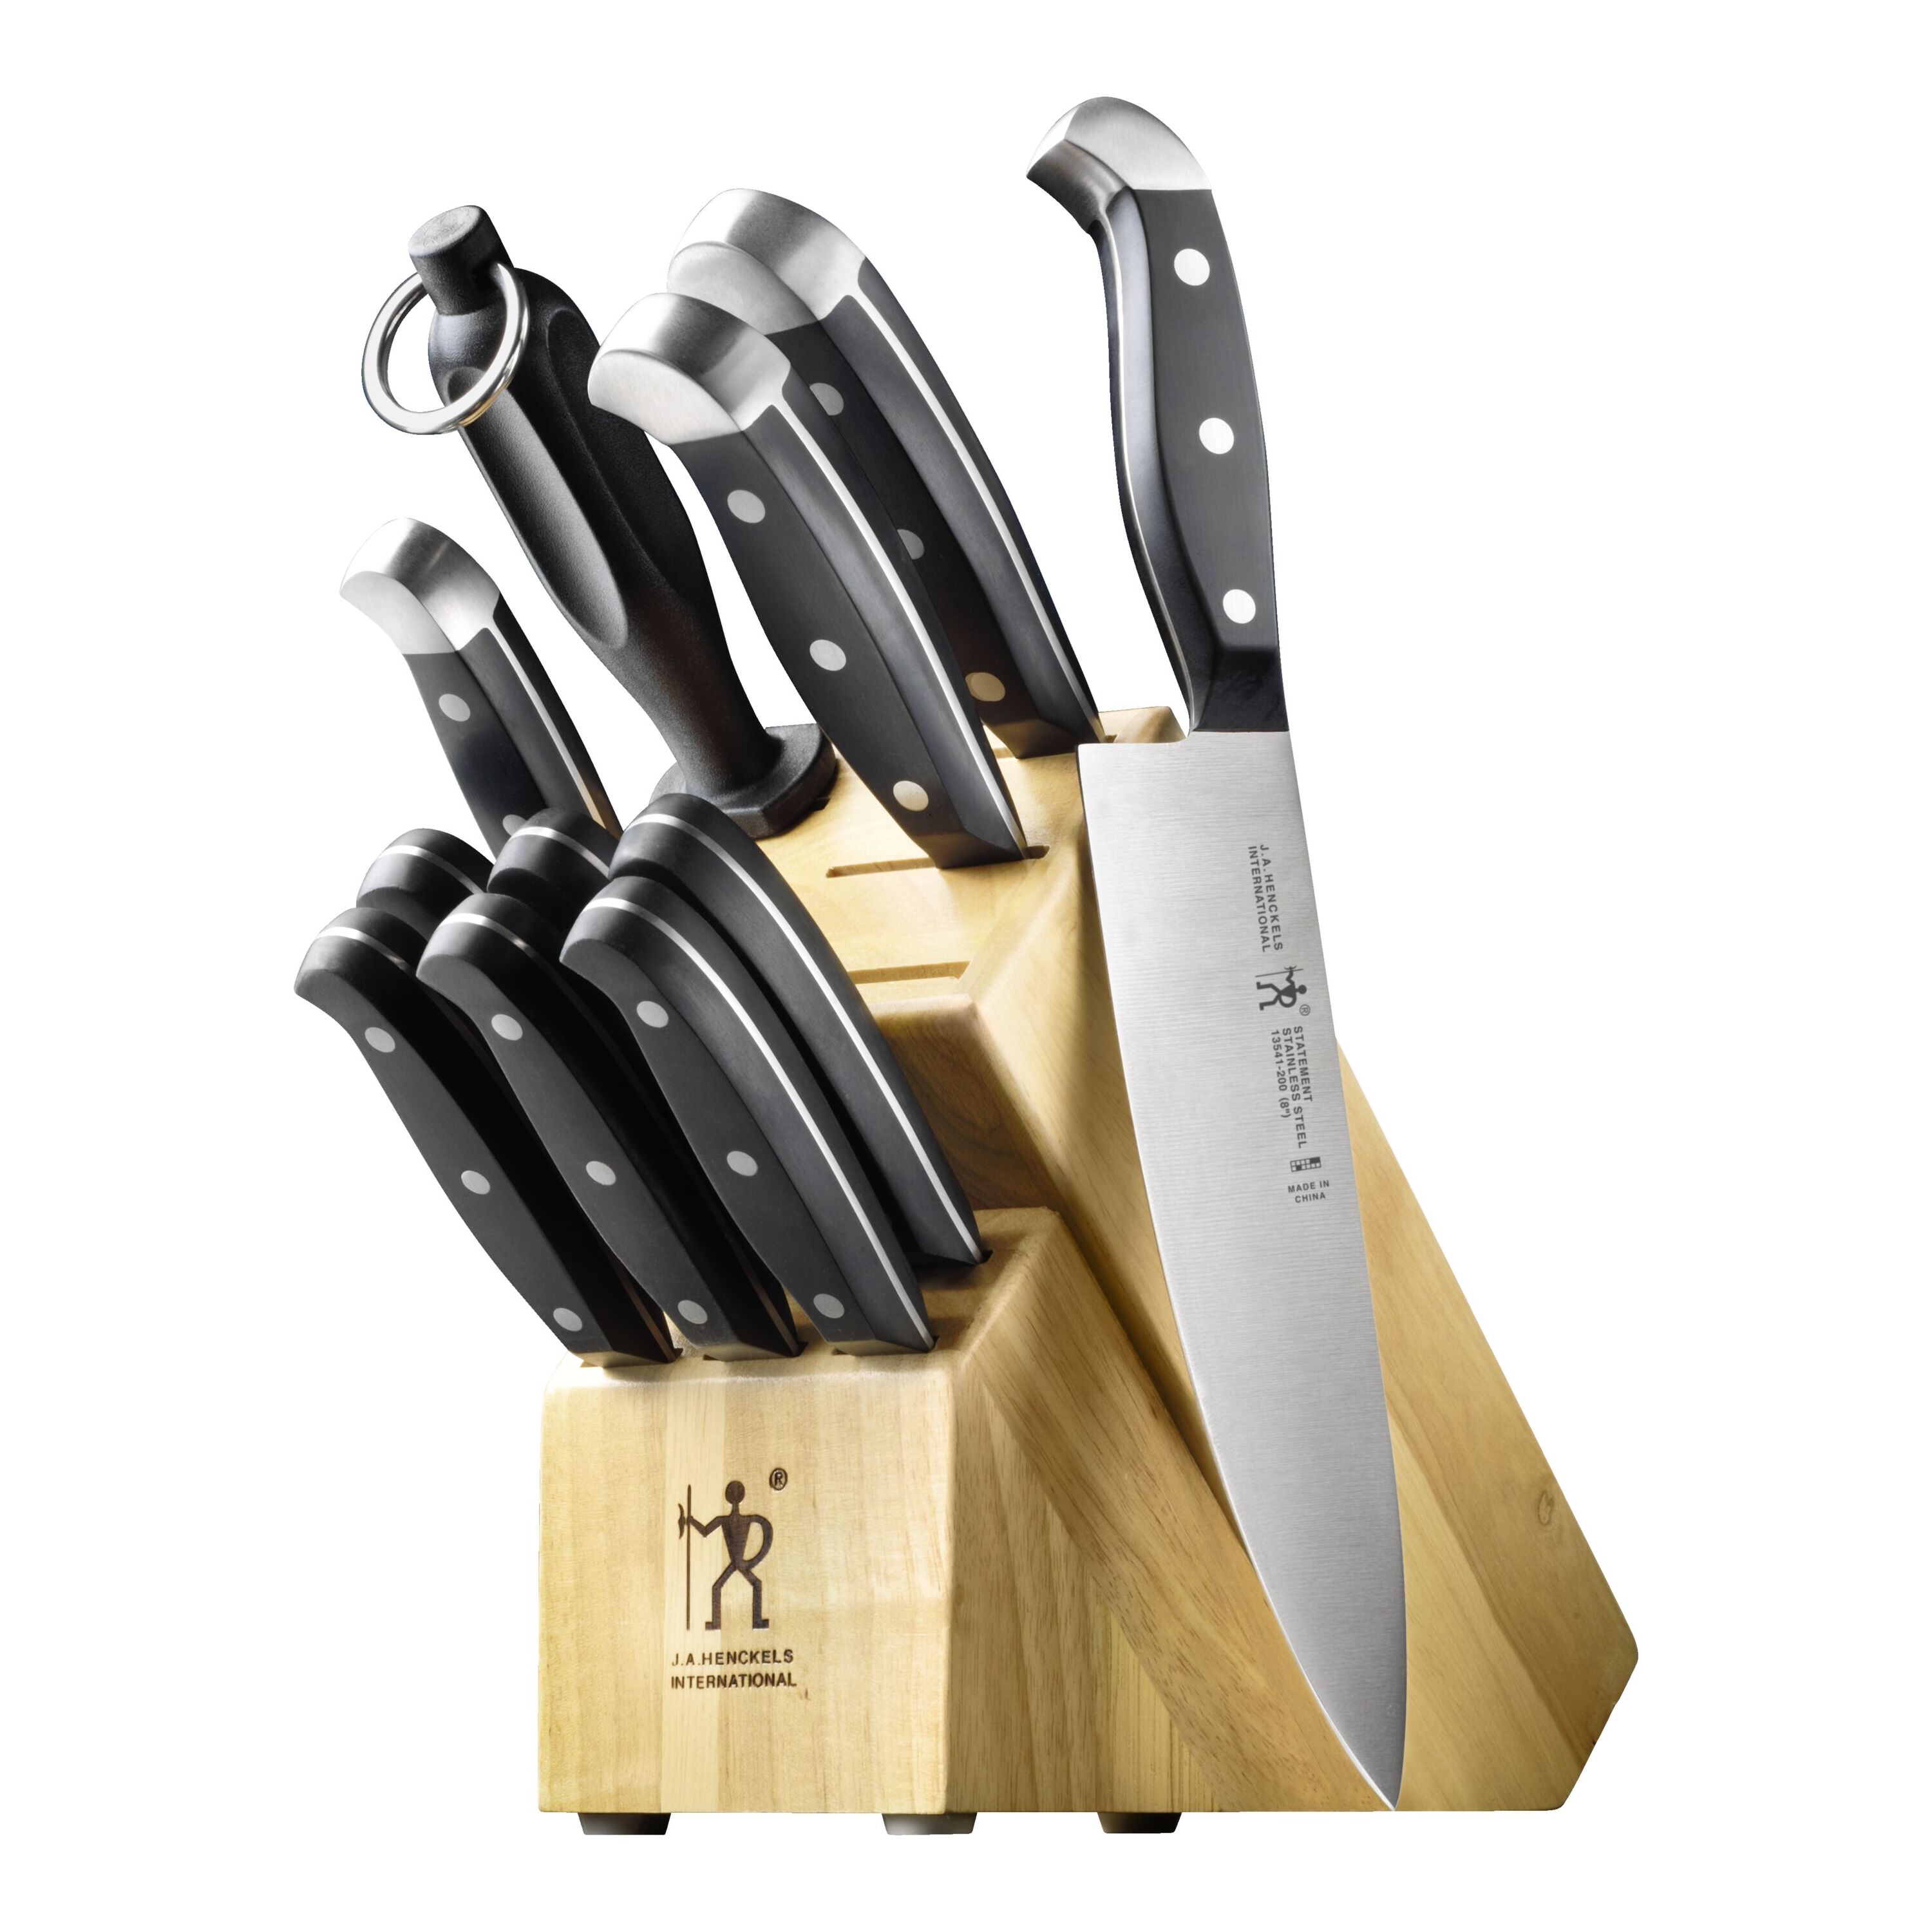 11 Piece Cutlery knife set in Chef Bag, Black ABS